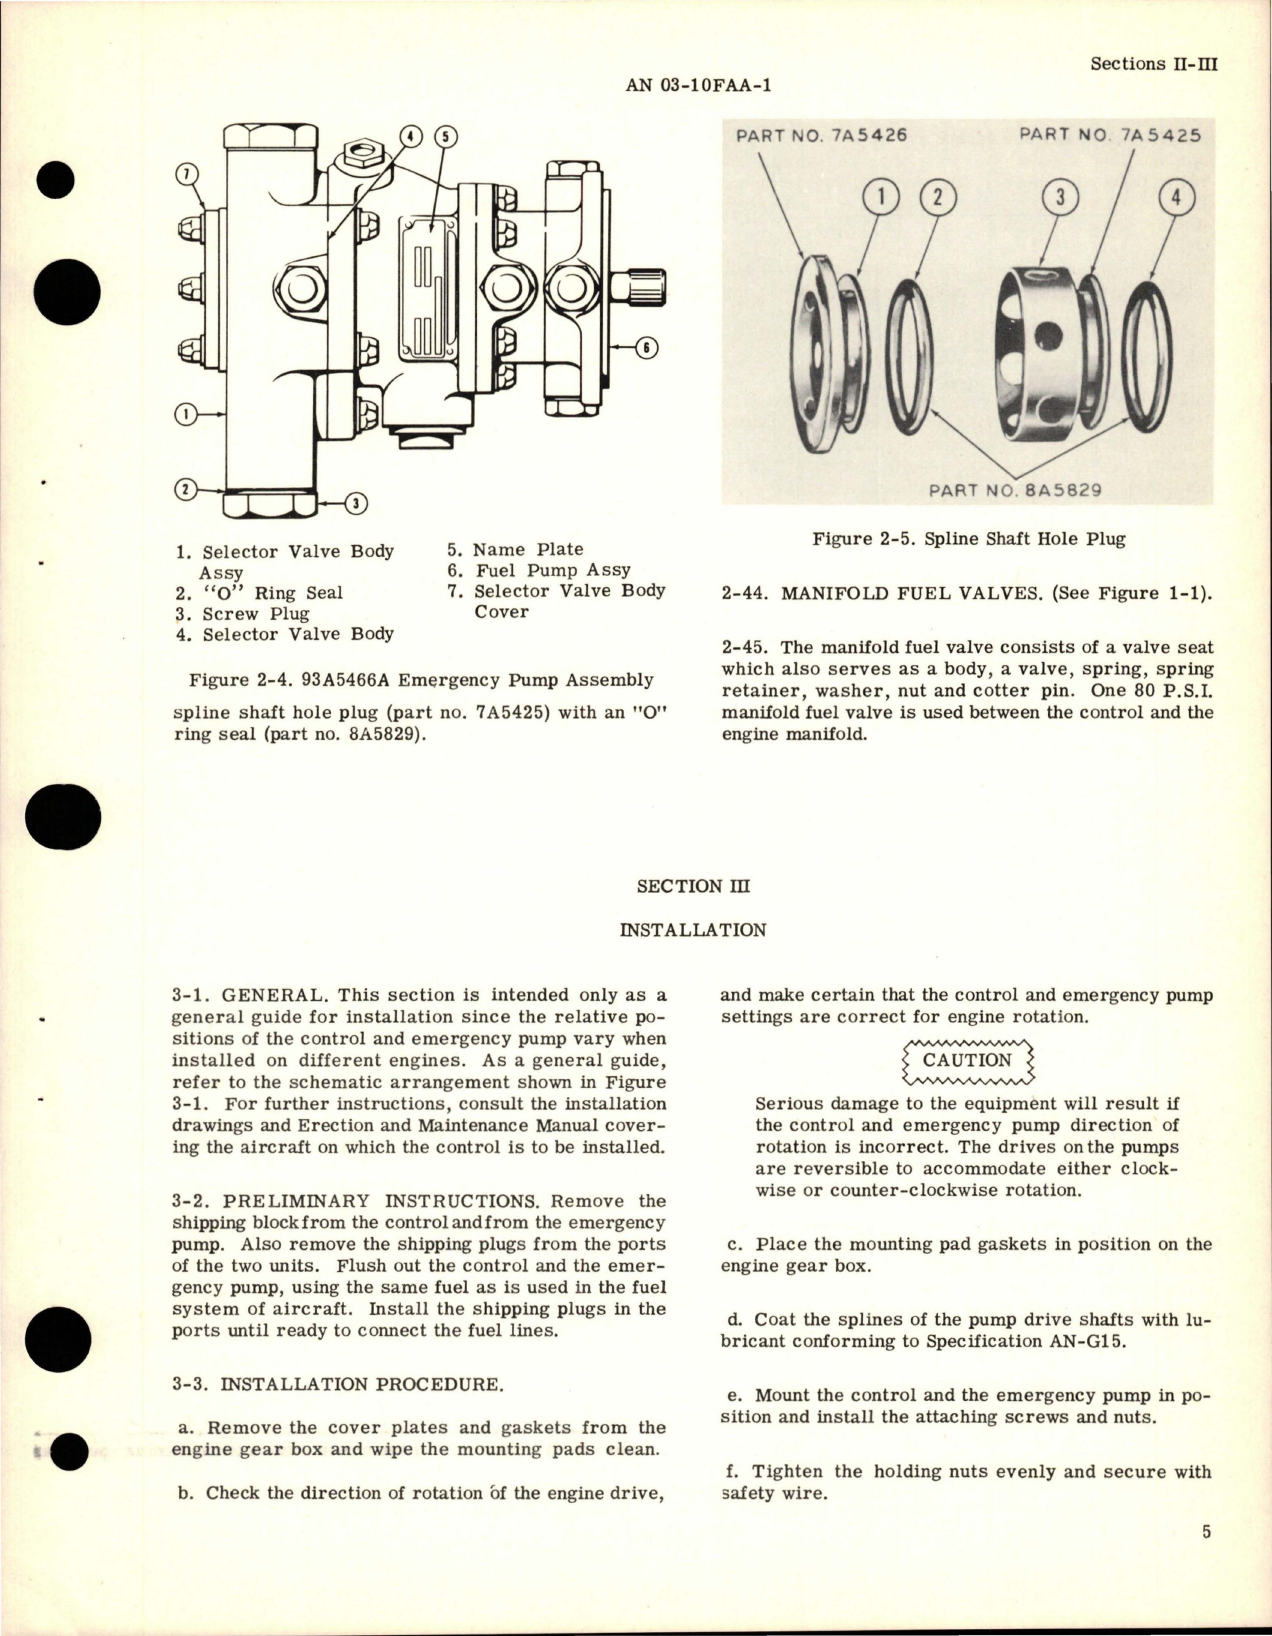 Sample page 9 from AirCorps Library document: Overhaul Instructions for Fuel Control - Model A5462 and Emergency Fuel Pump